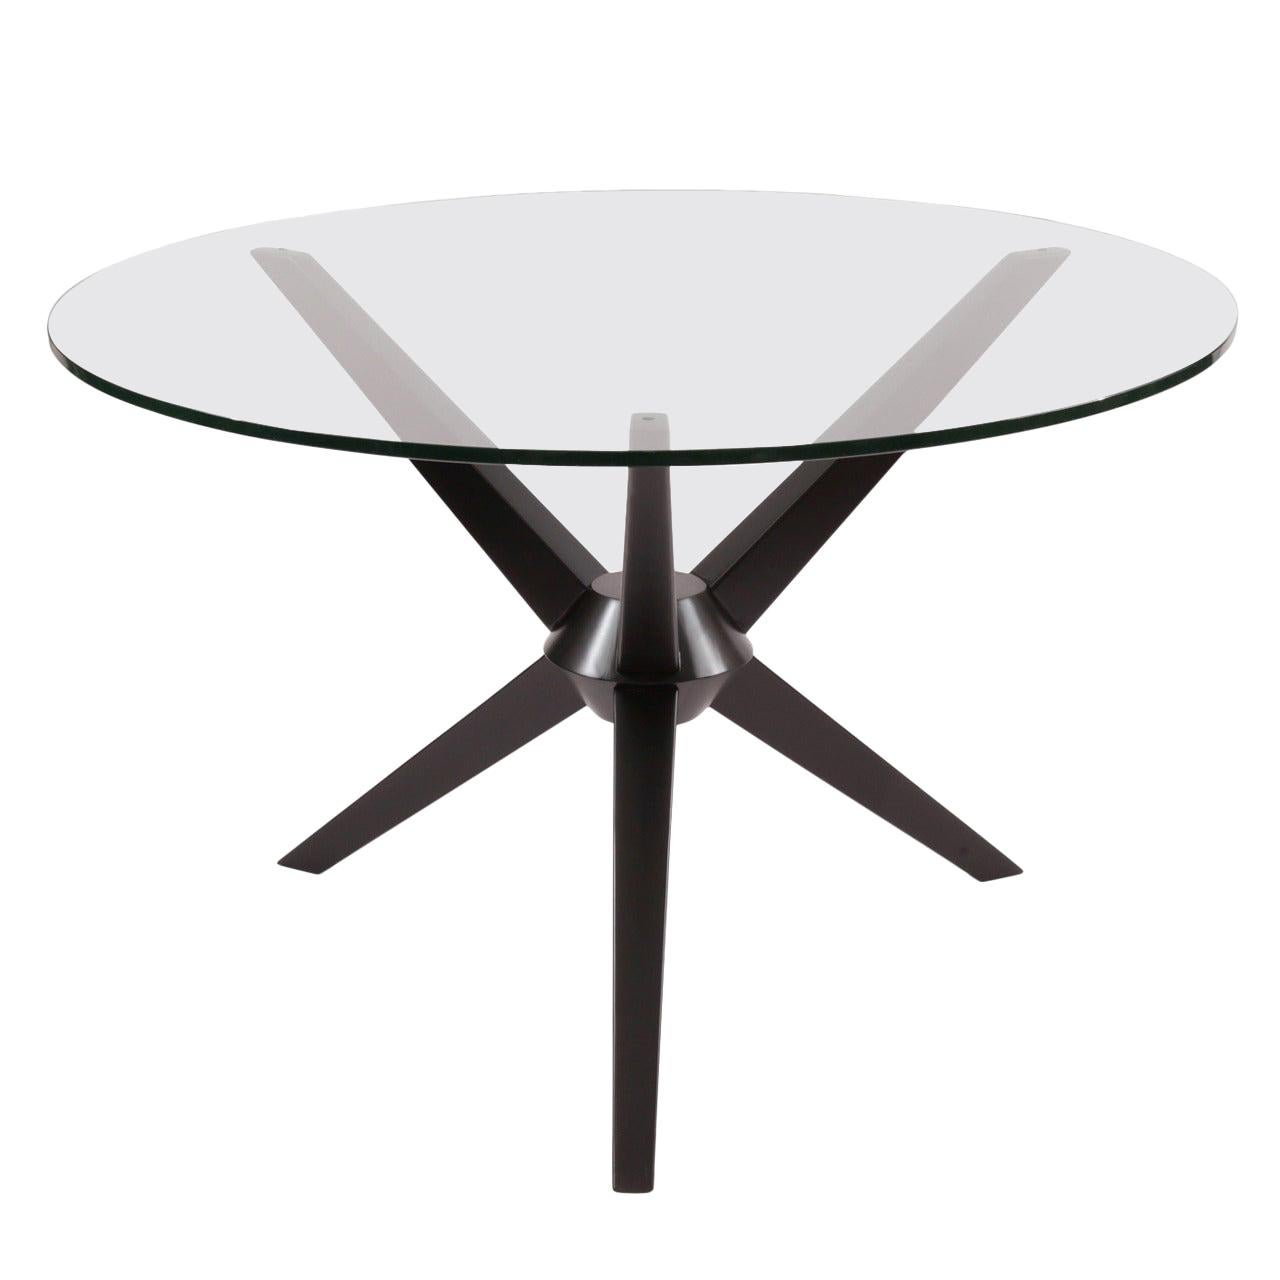 Ebonized Sculptural Maple Dining Table, 1950s